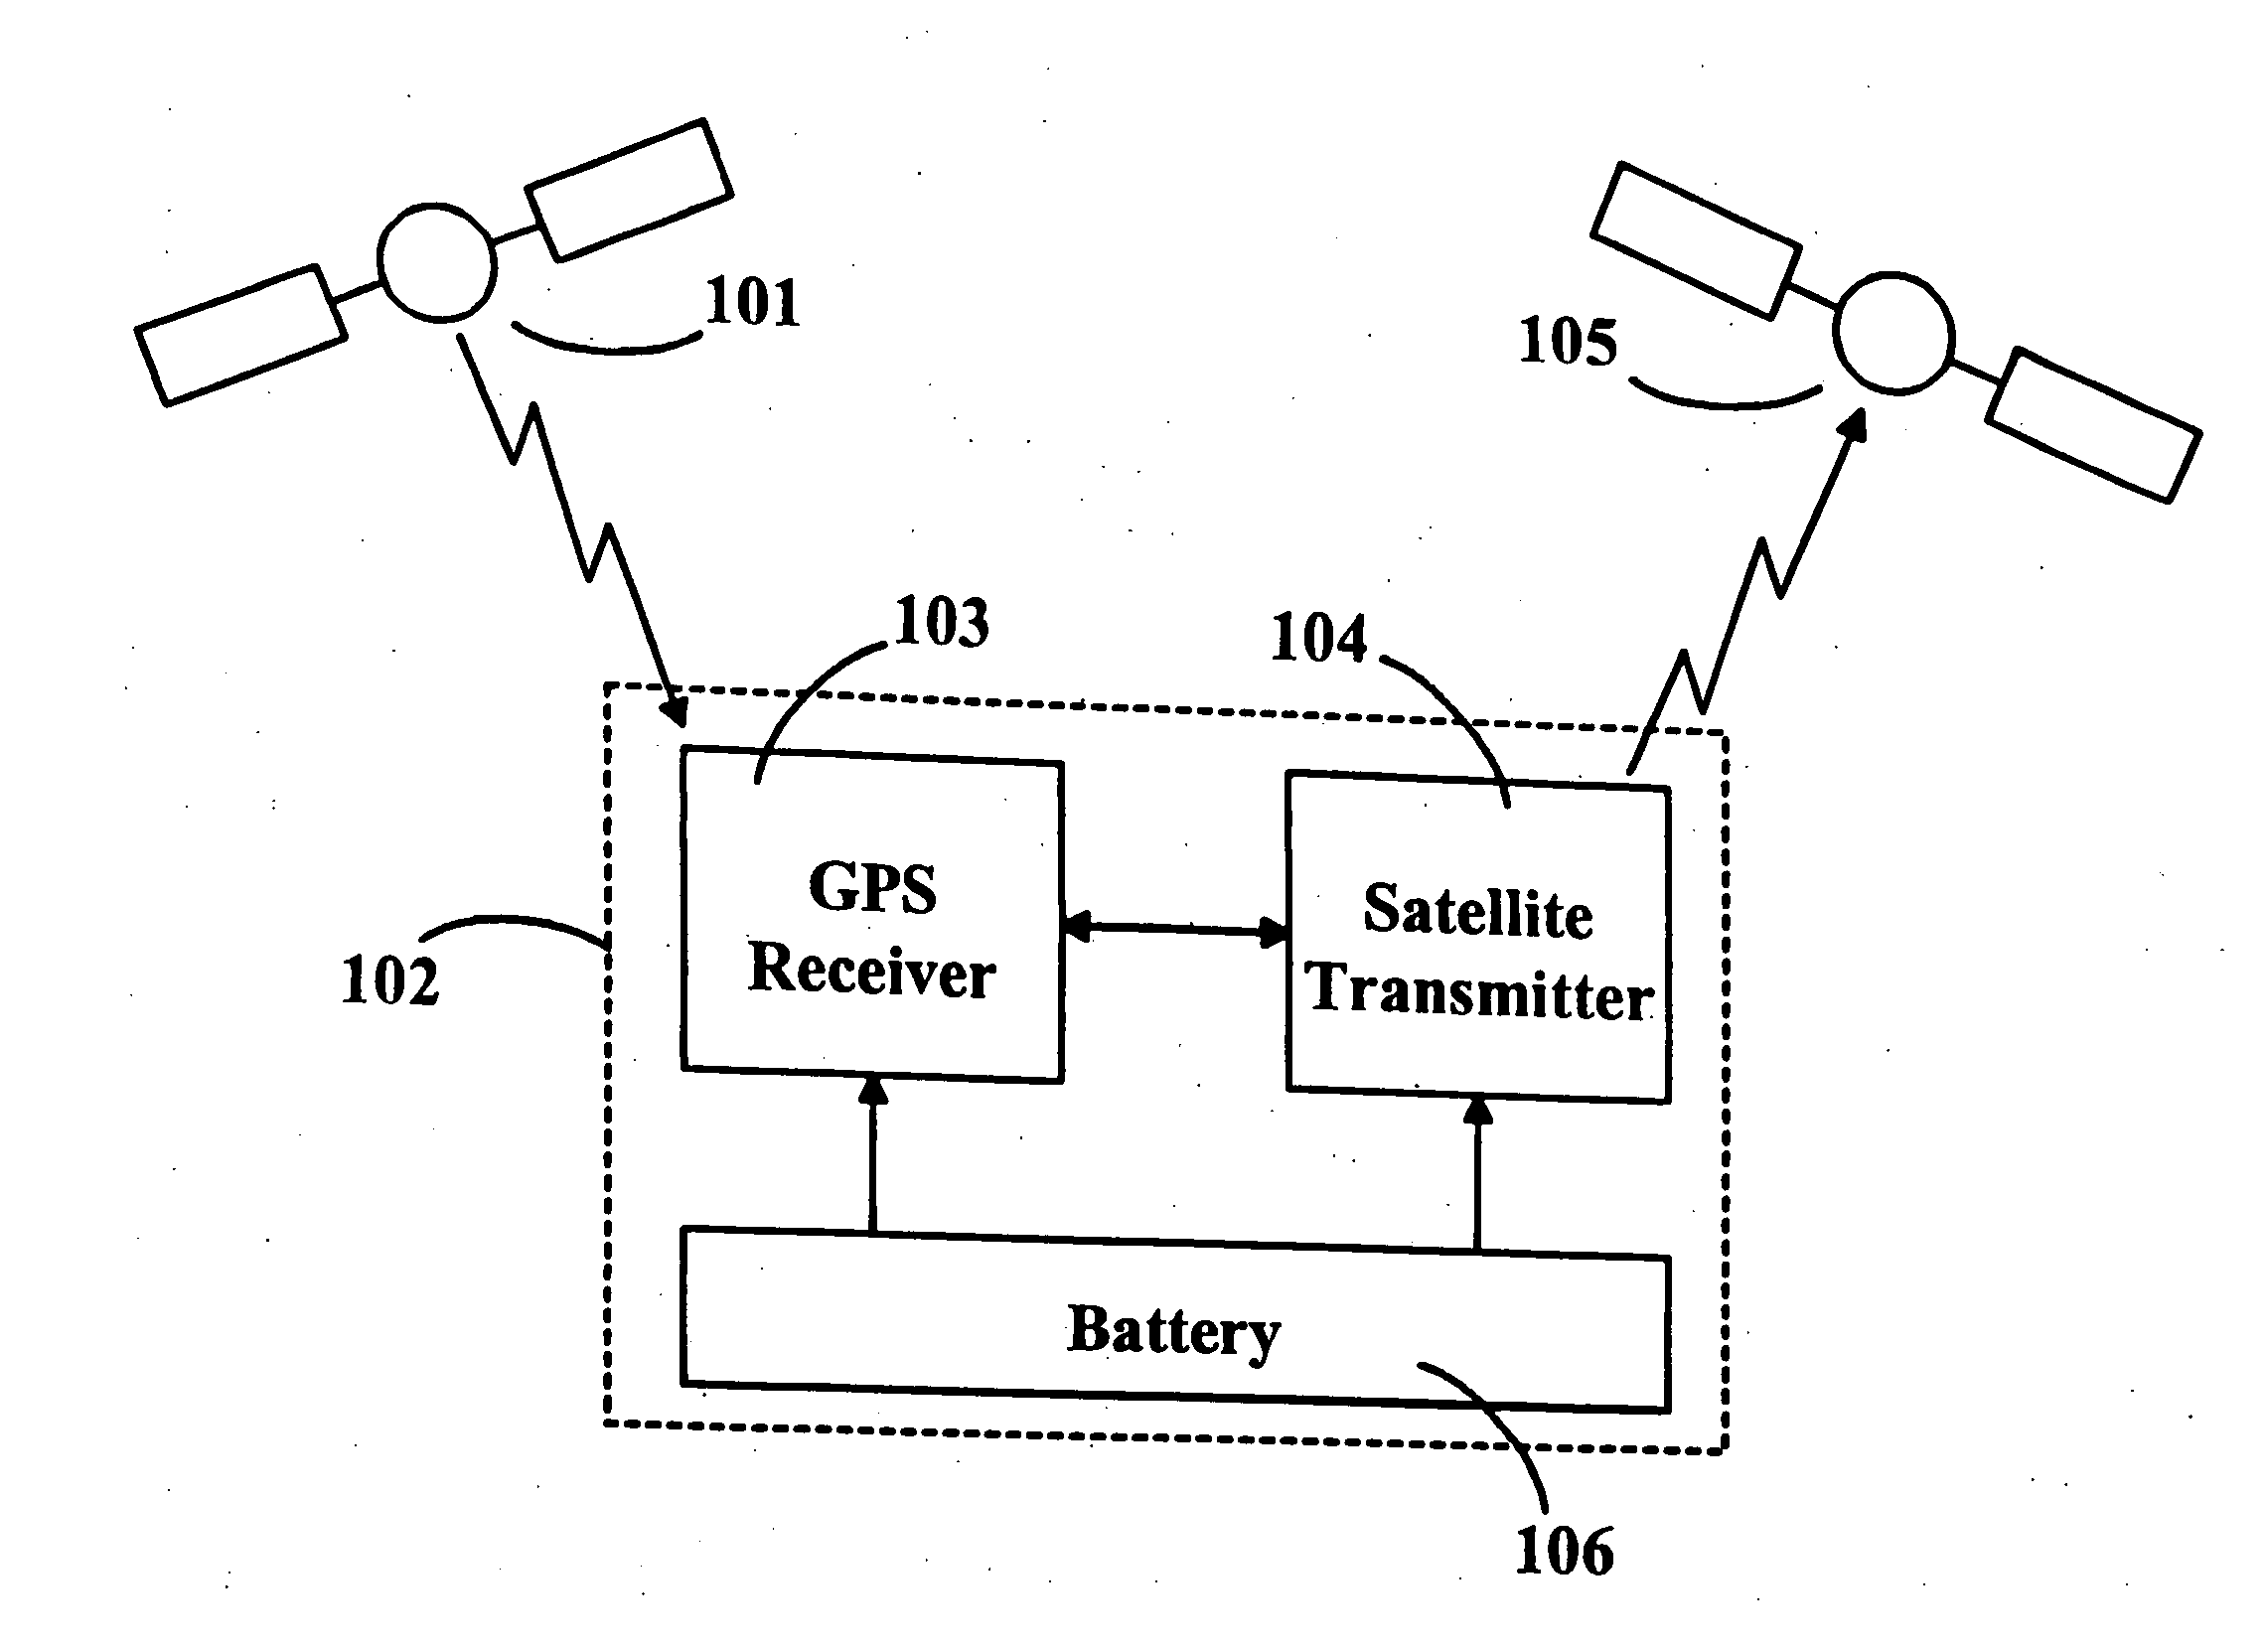 Location monitoring and transmitting device, method, and computer program product using a simplex satellite transmitter